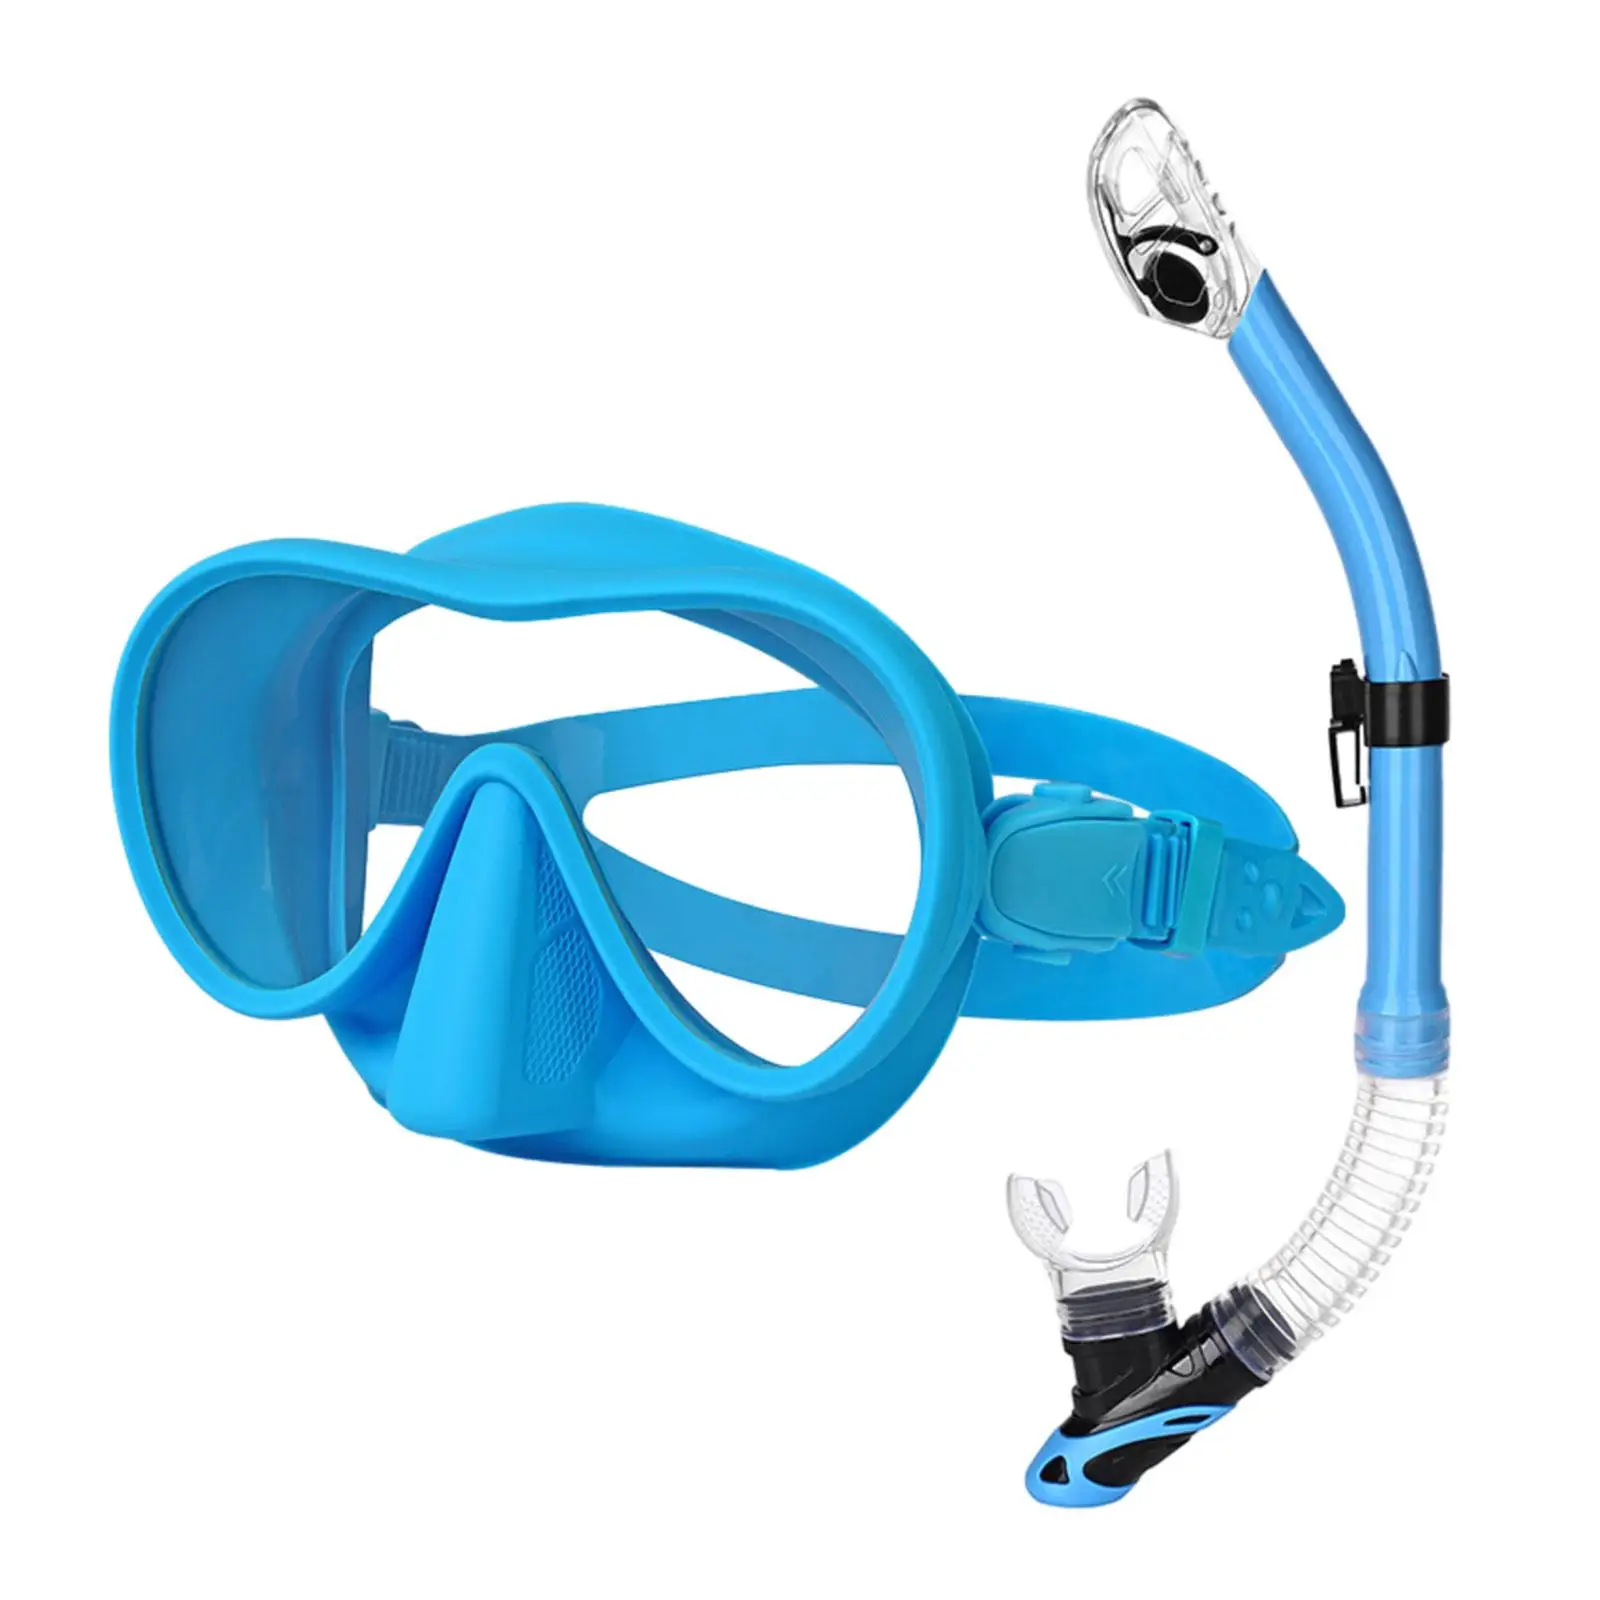 Snorkel Set Snorkel Swim Goggles Wide View Diving Mask Leakproof Swimming Goggles Swim Mask for Snorkeling Swimming Scuba Diving